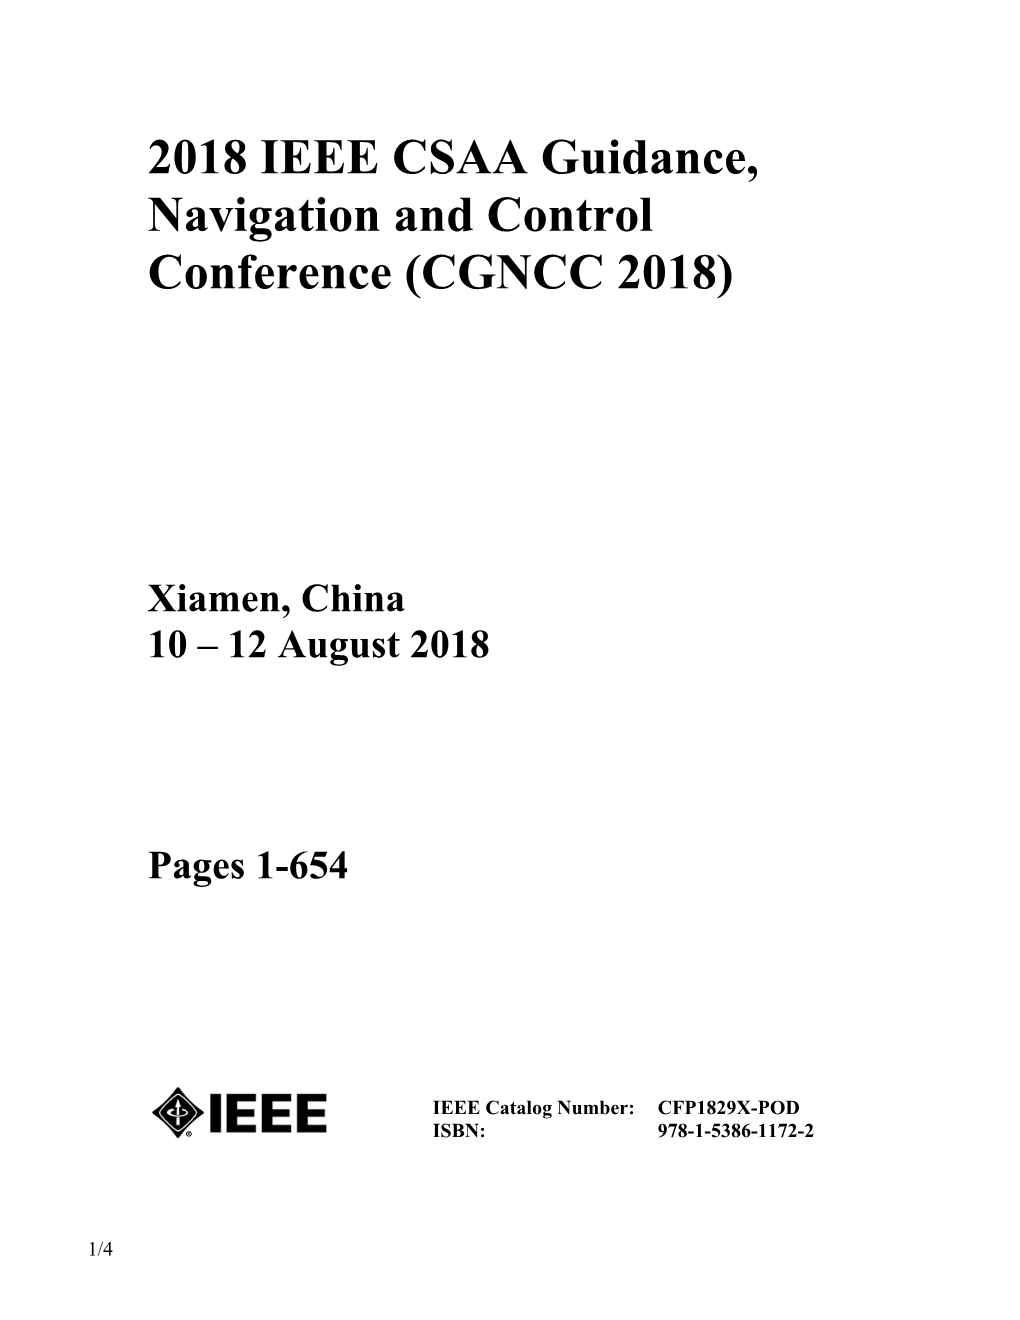 2018 IEEE CSAA Guidance, Navigation and Control Conference